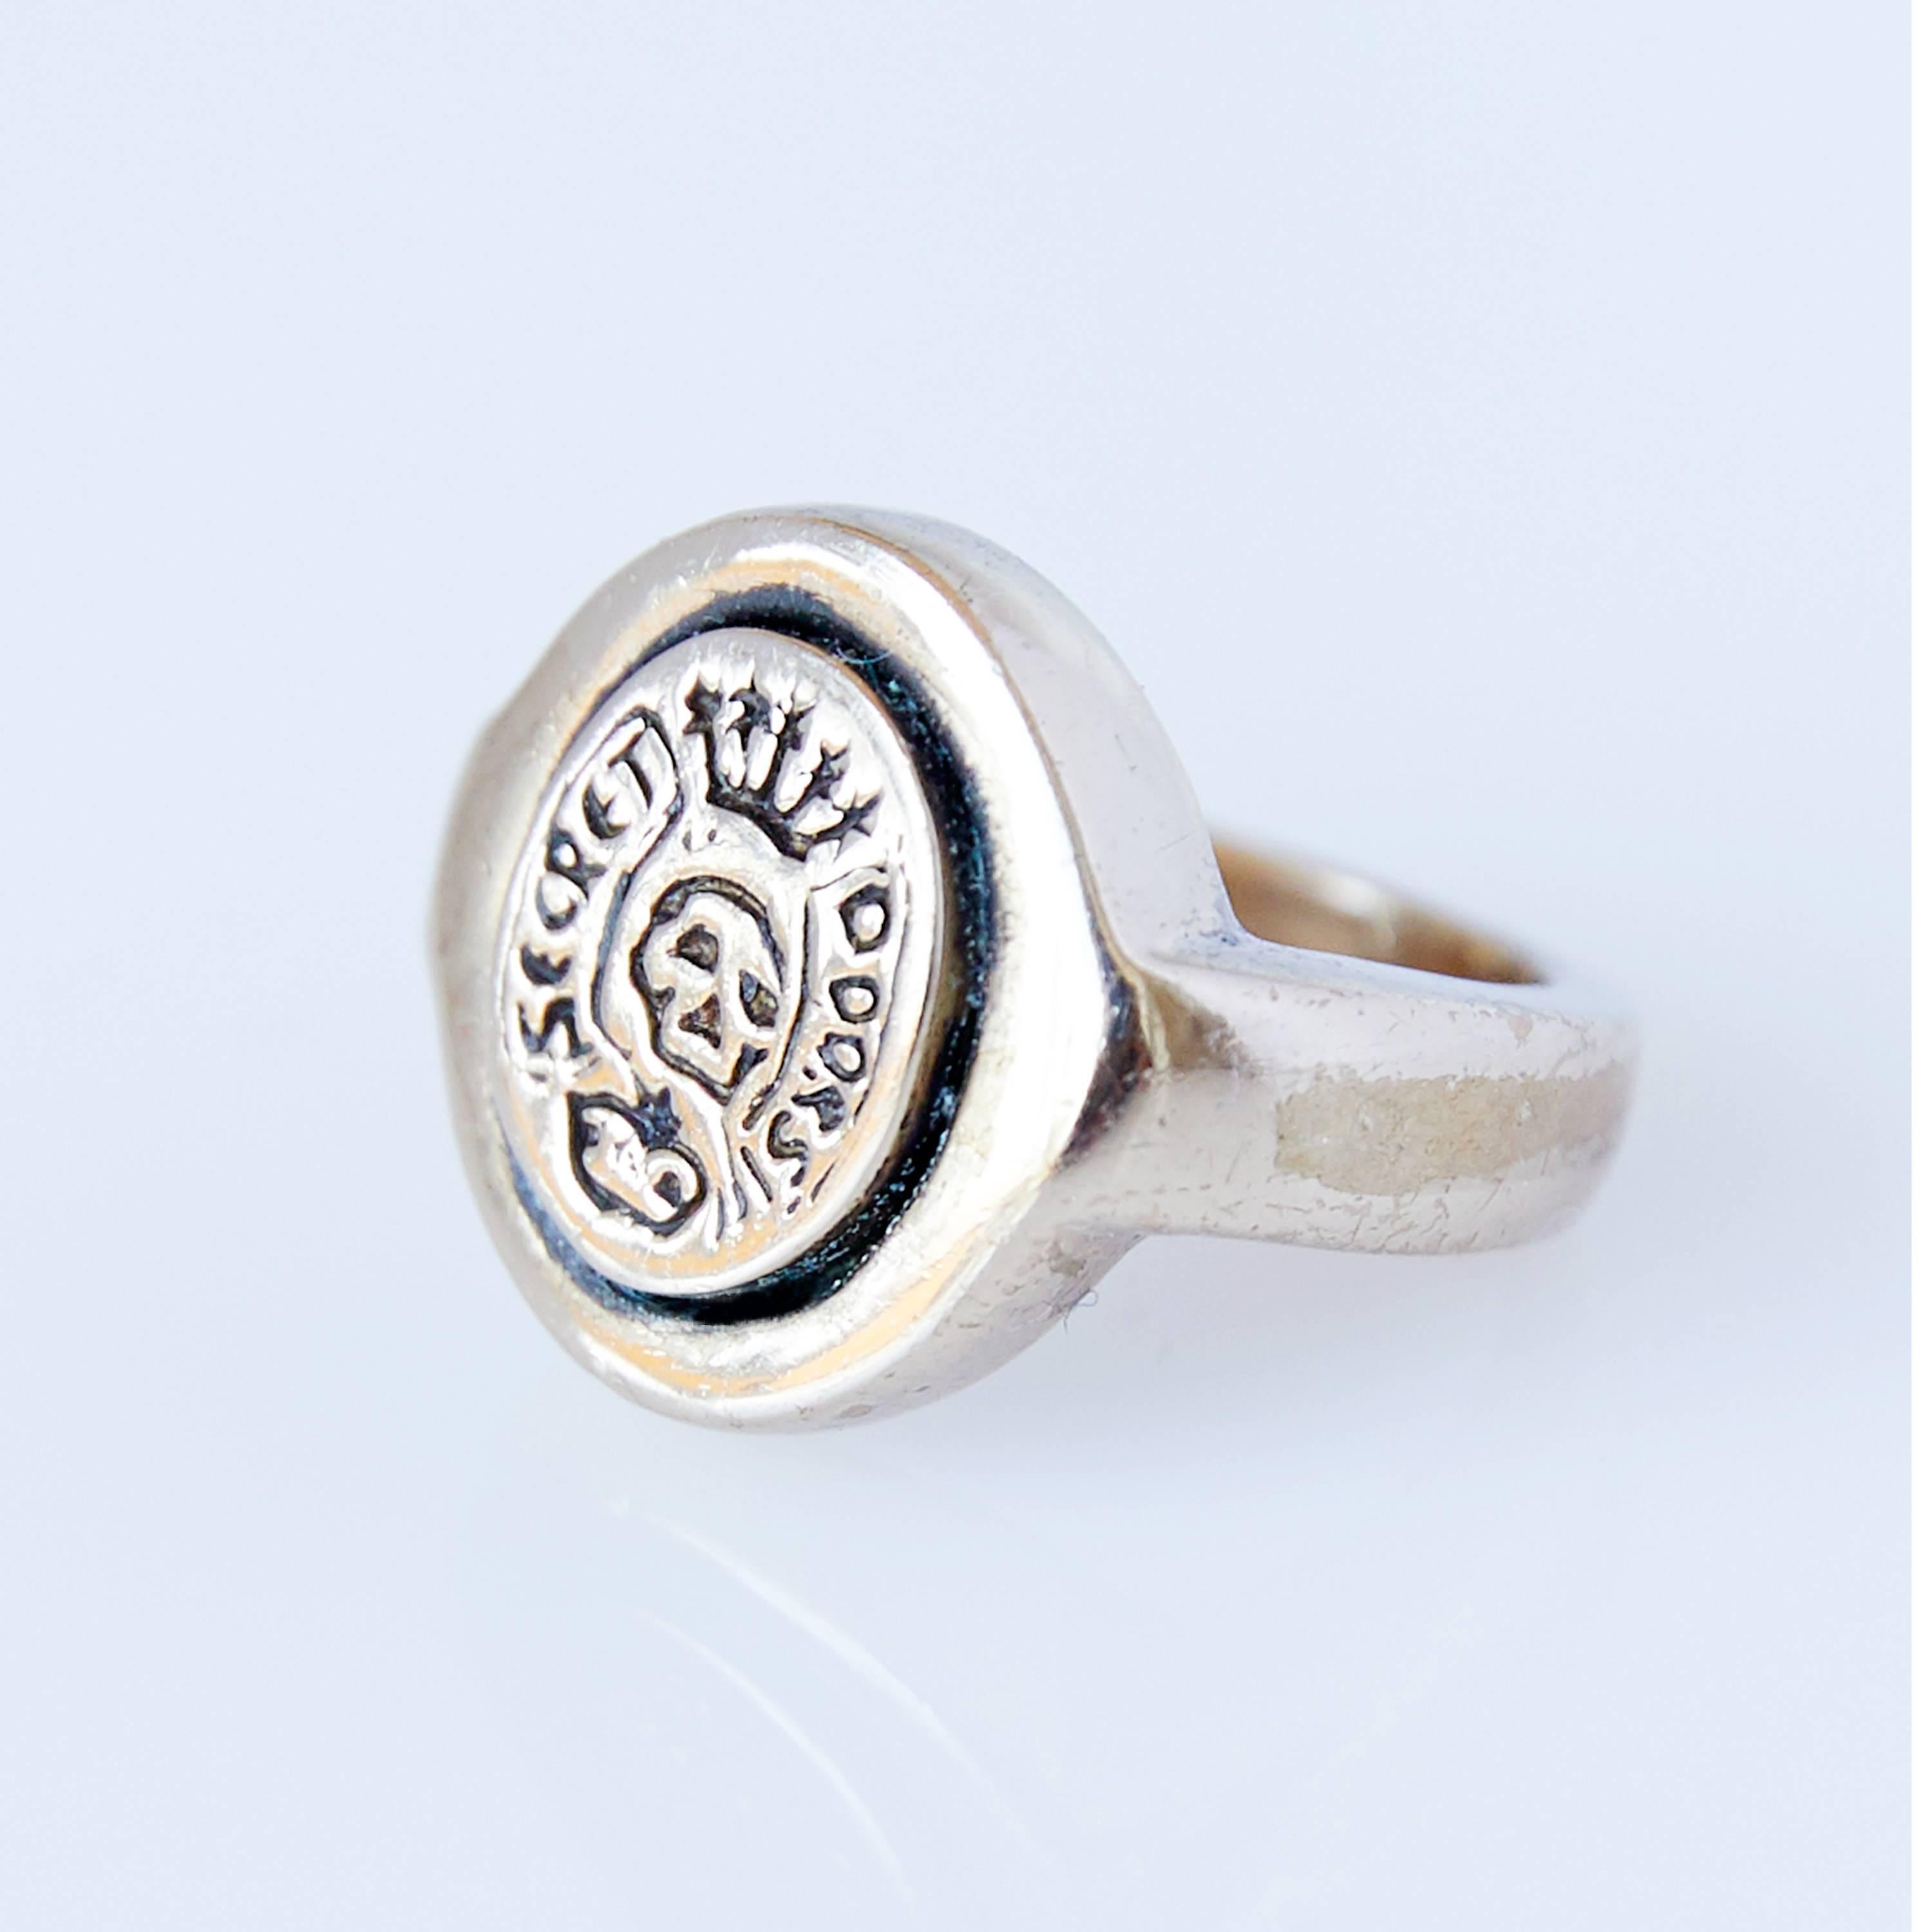 Contemporary Crest Signet Ring Gold Vermeil Skull Memento Mori Pinky Ring J Dauphin For Sale